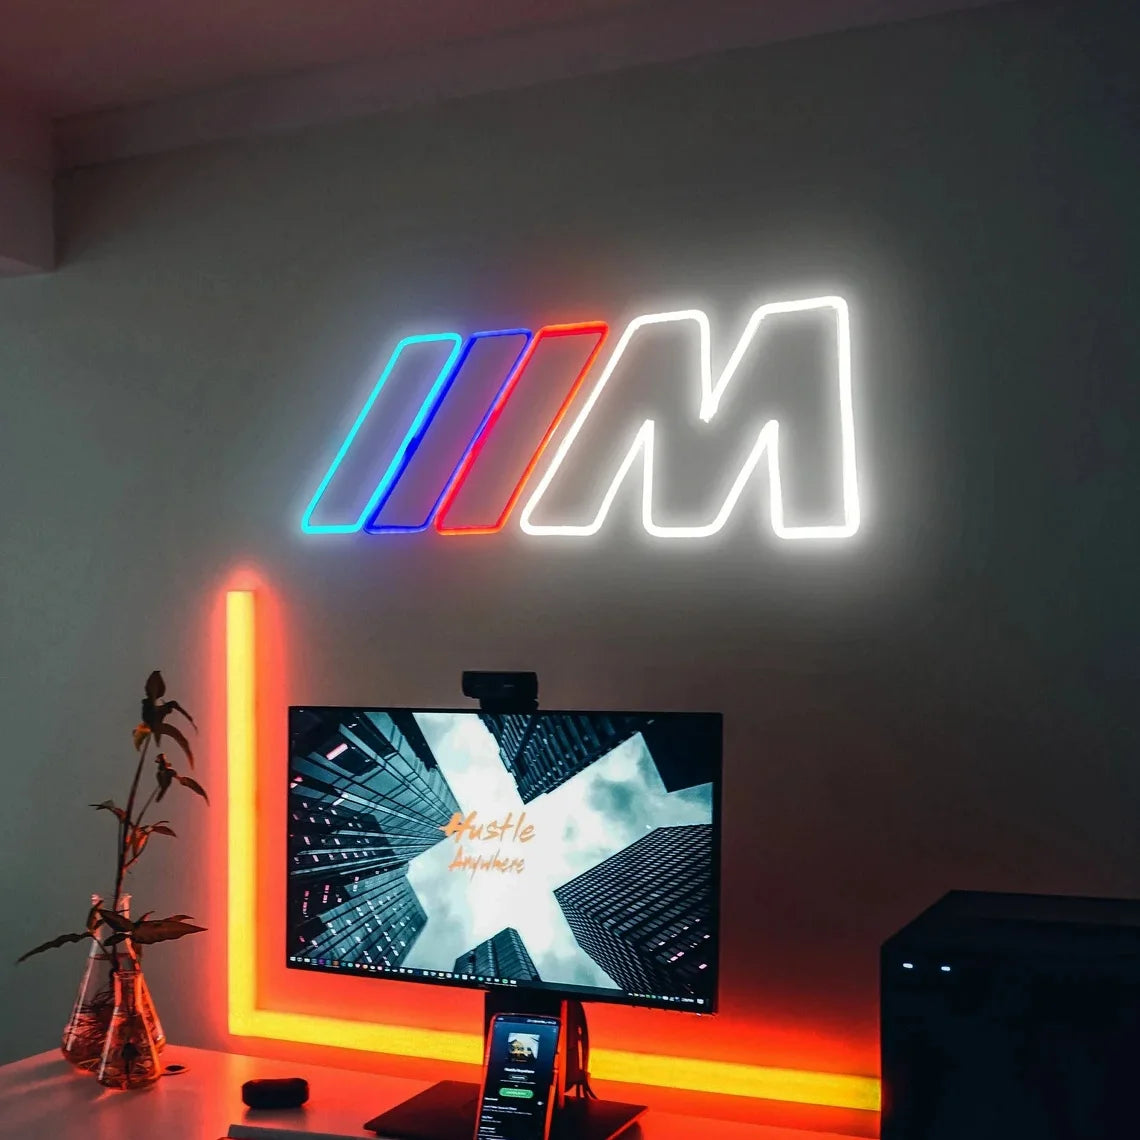 Upgrade your garage with a personalized BMW neon sign. Elevate your space with custom automotive neon lights. Shop now for unique garage signs that add flair to your domain